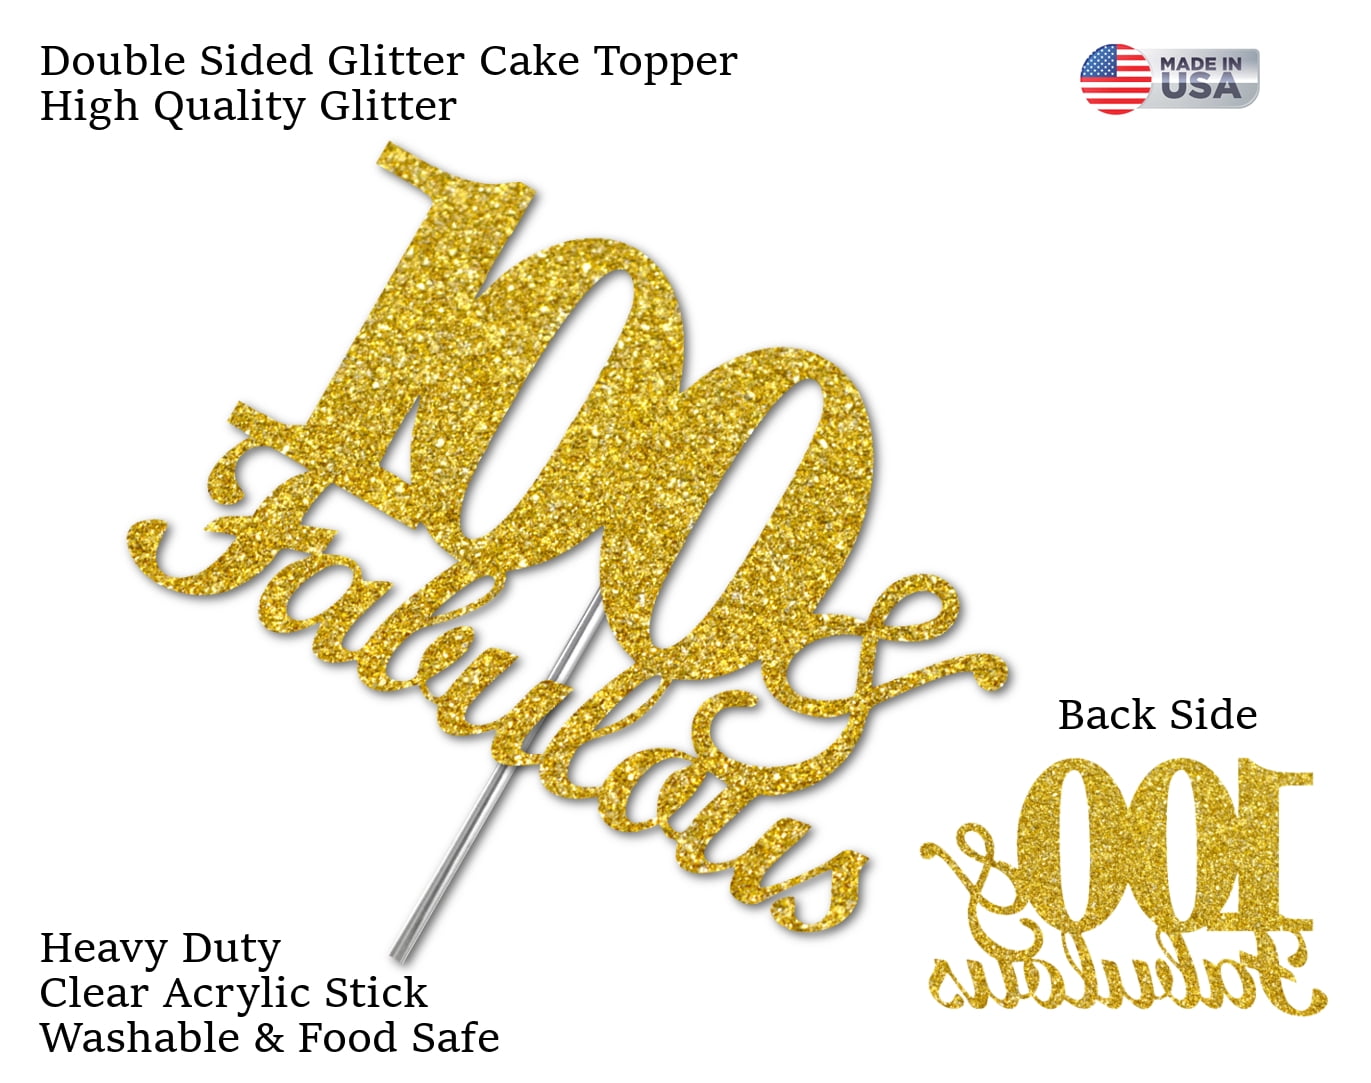 Fabulous & 100 Cake Topper Gold Glitter, 100th Birthday Party Decoration  Ideas, Sturdy Doubled Sided Glitter, Acrylic Stick. Made in USA